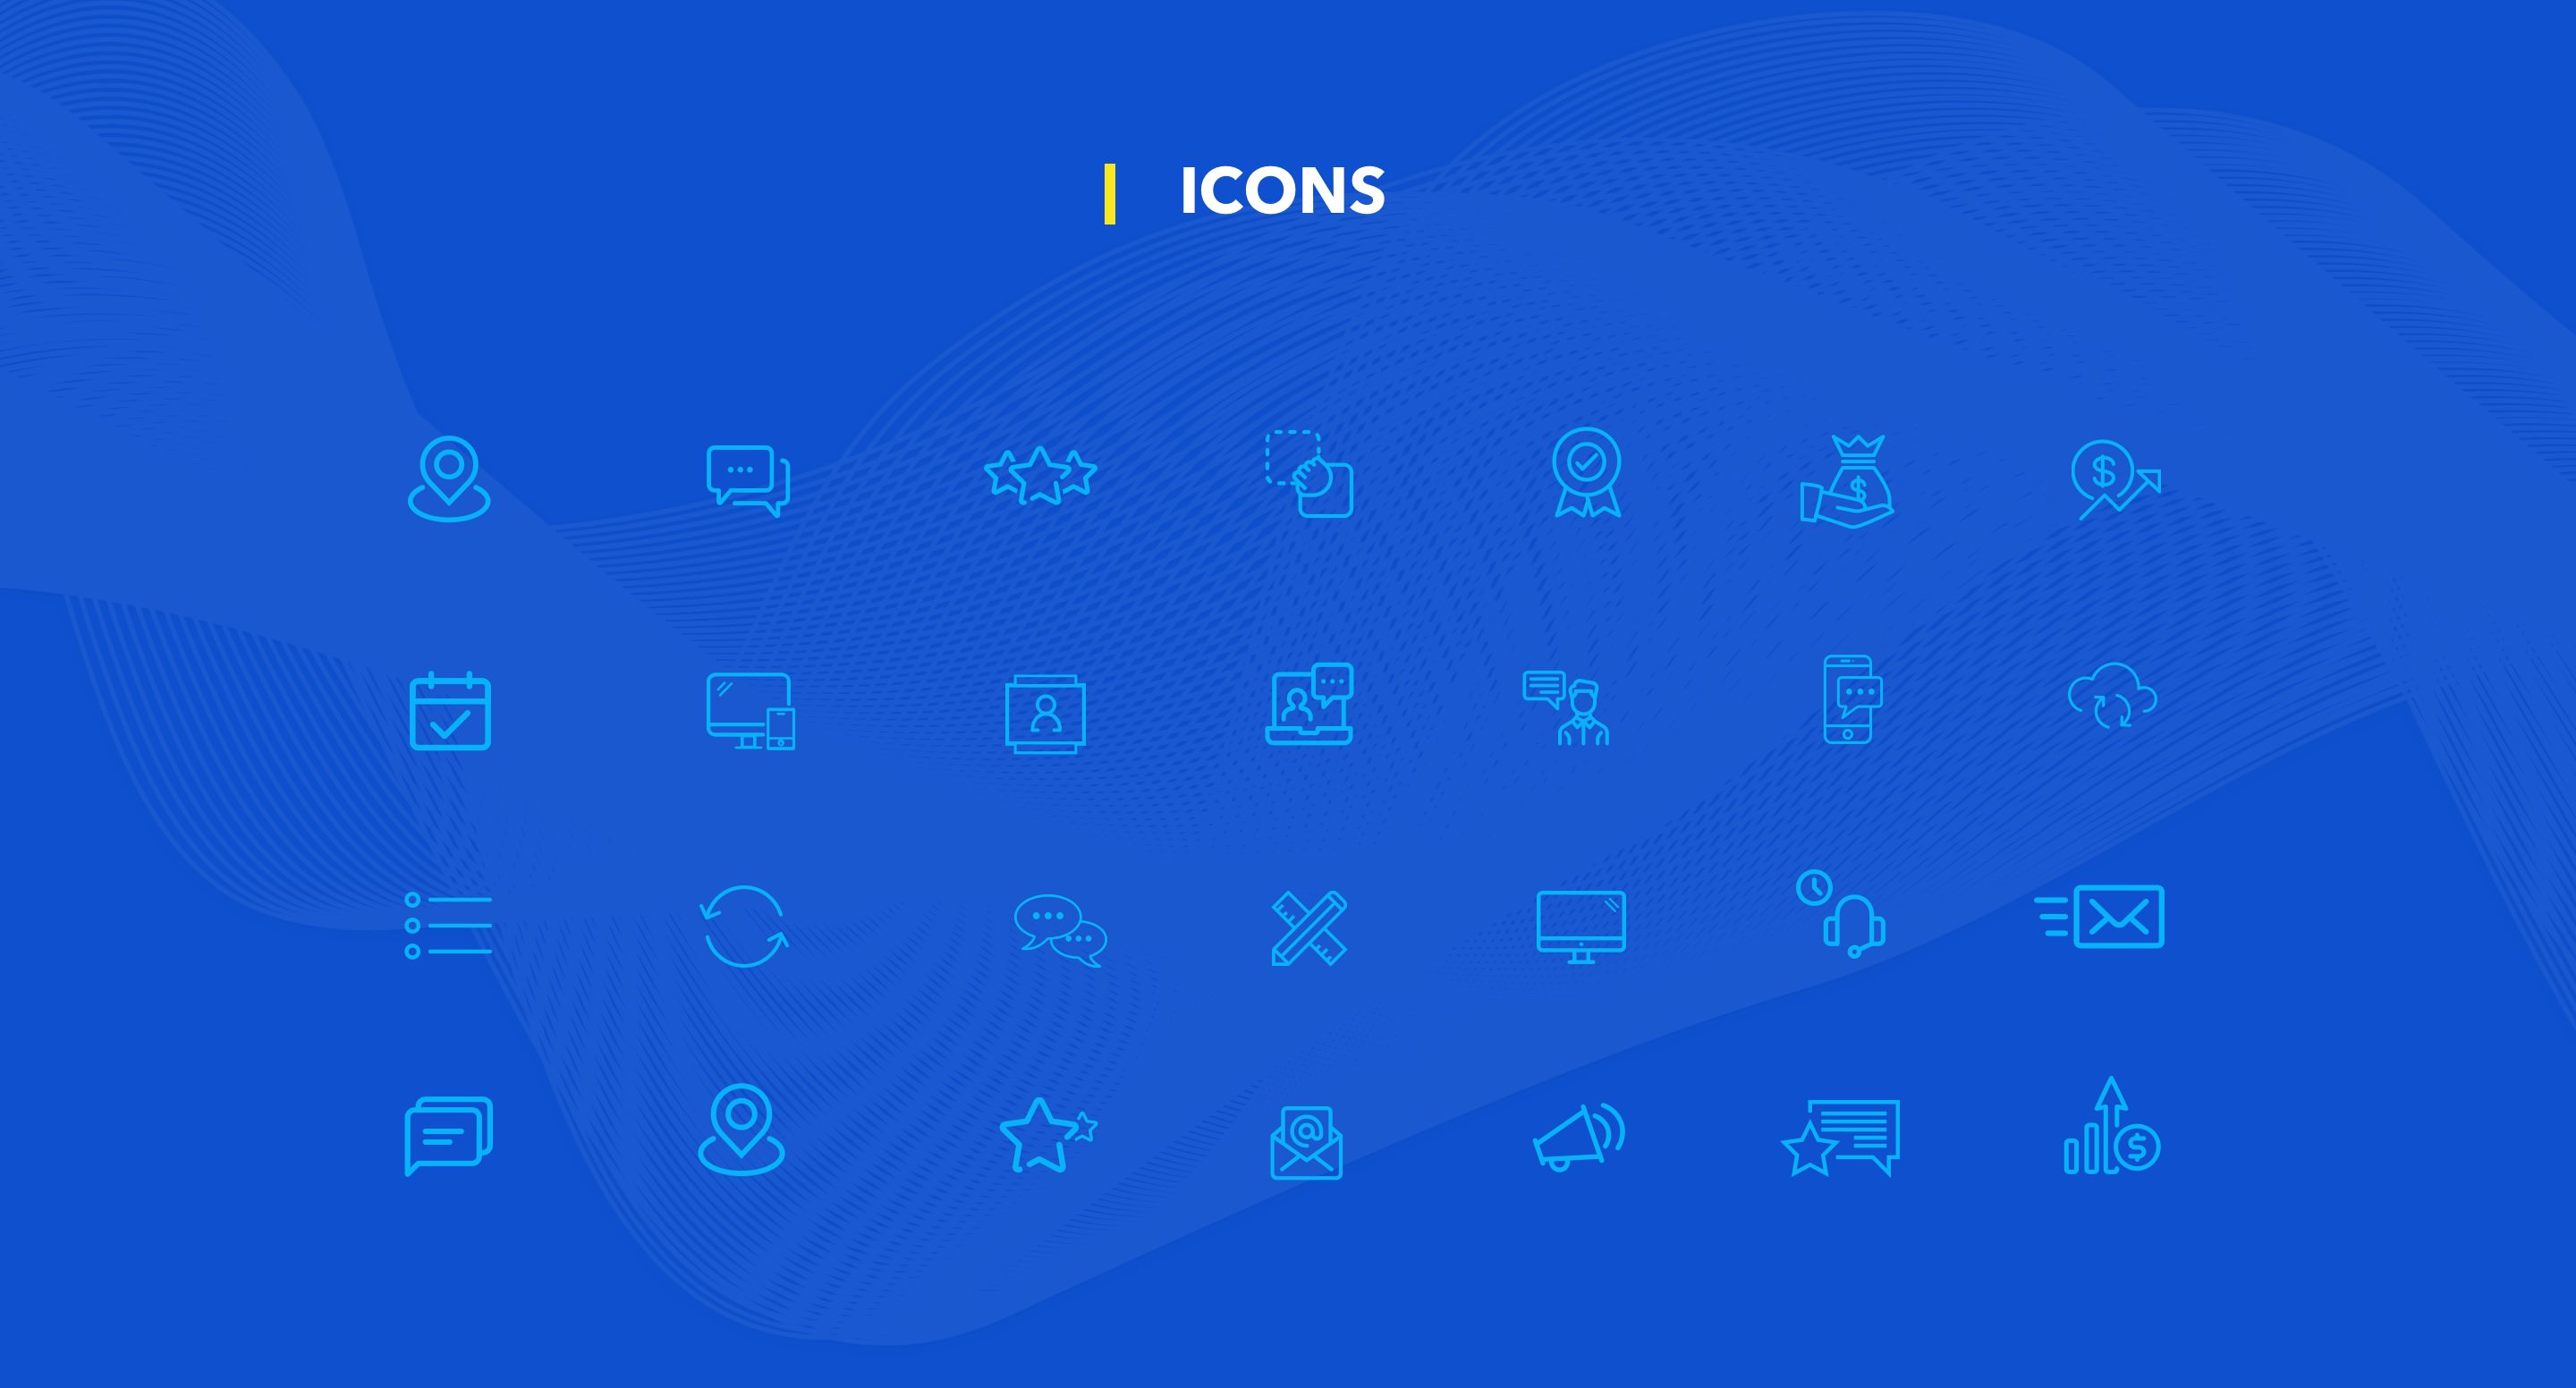 Gosite icons design ui 01 by 11thagency